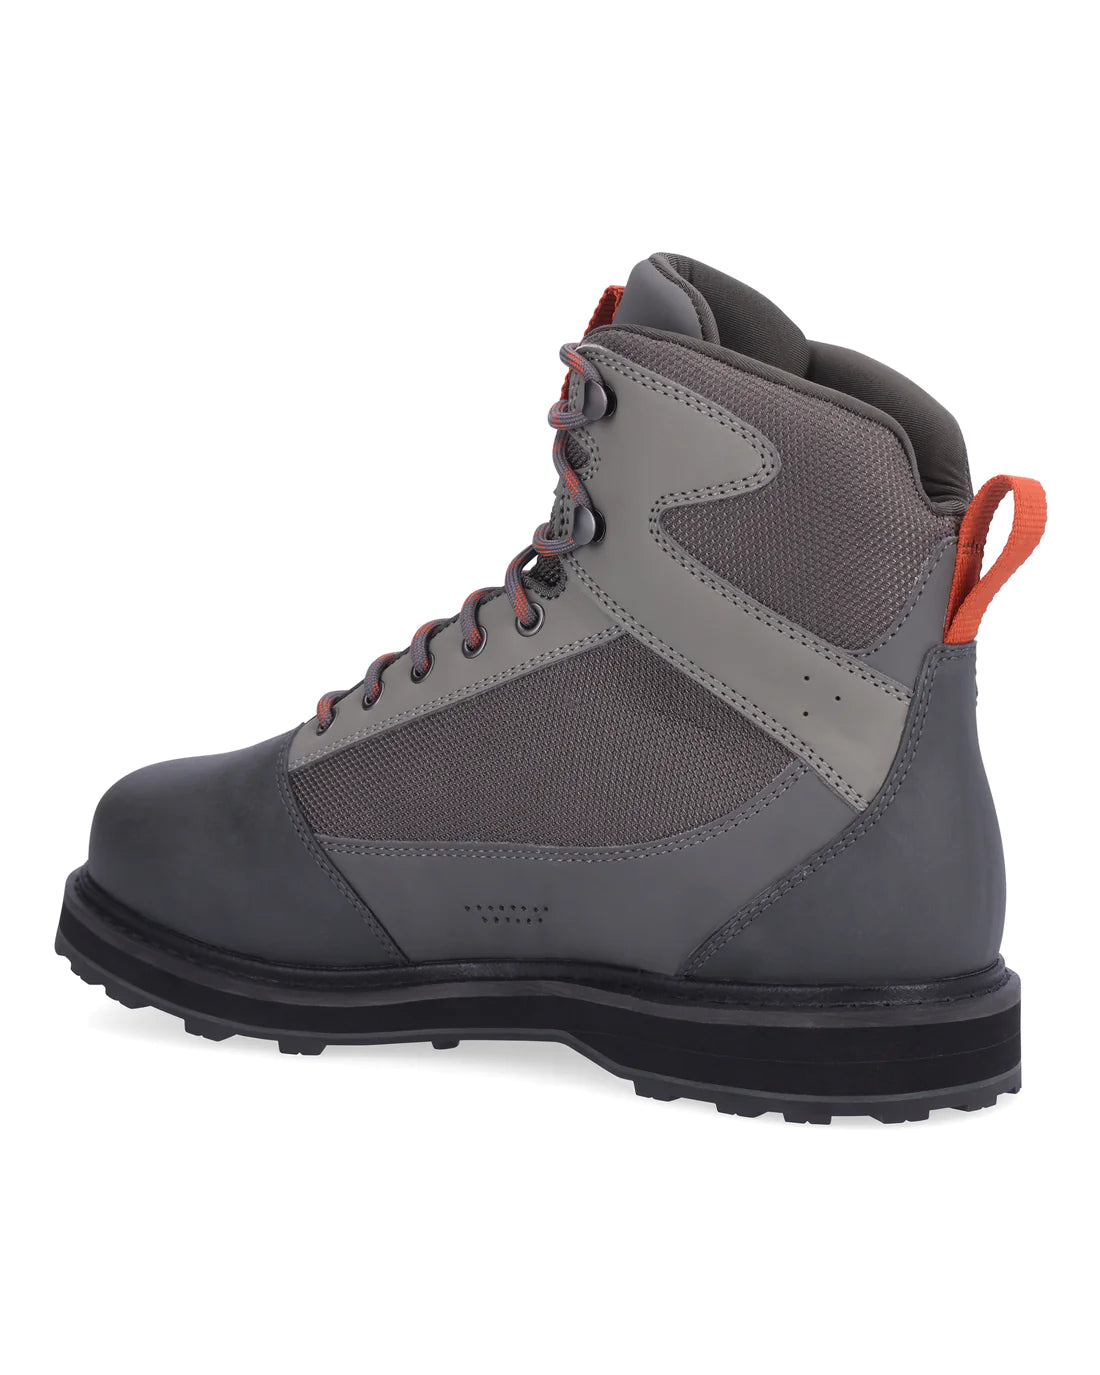 Simms Men's Tributary Boot - Rubber Sole